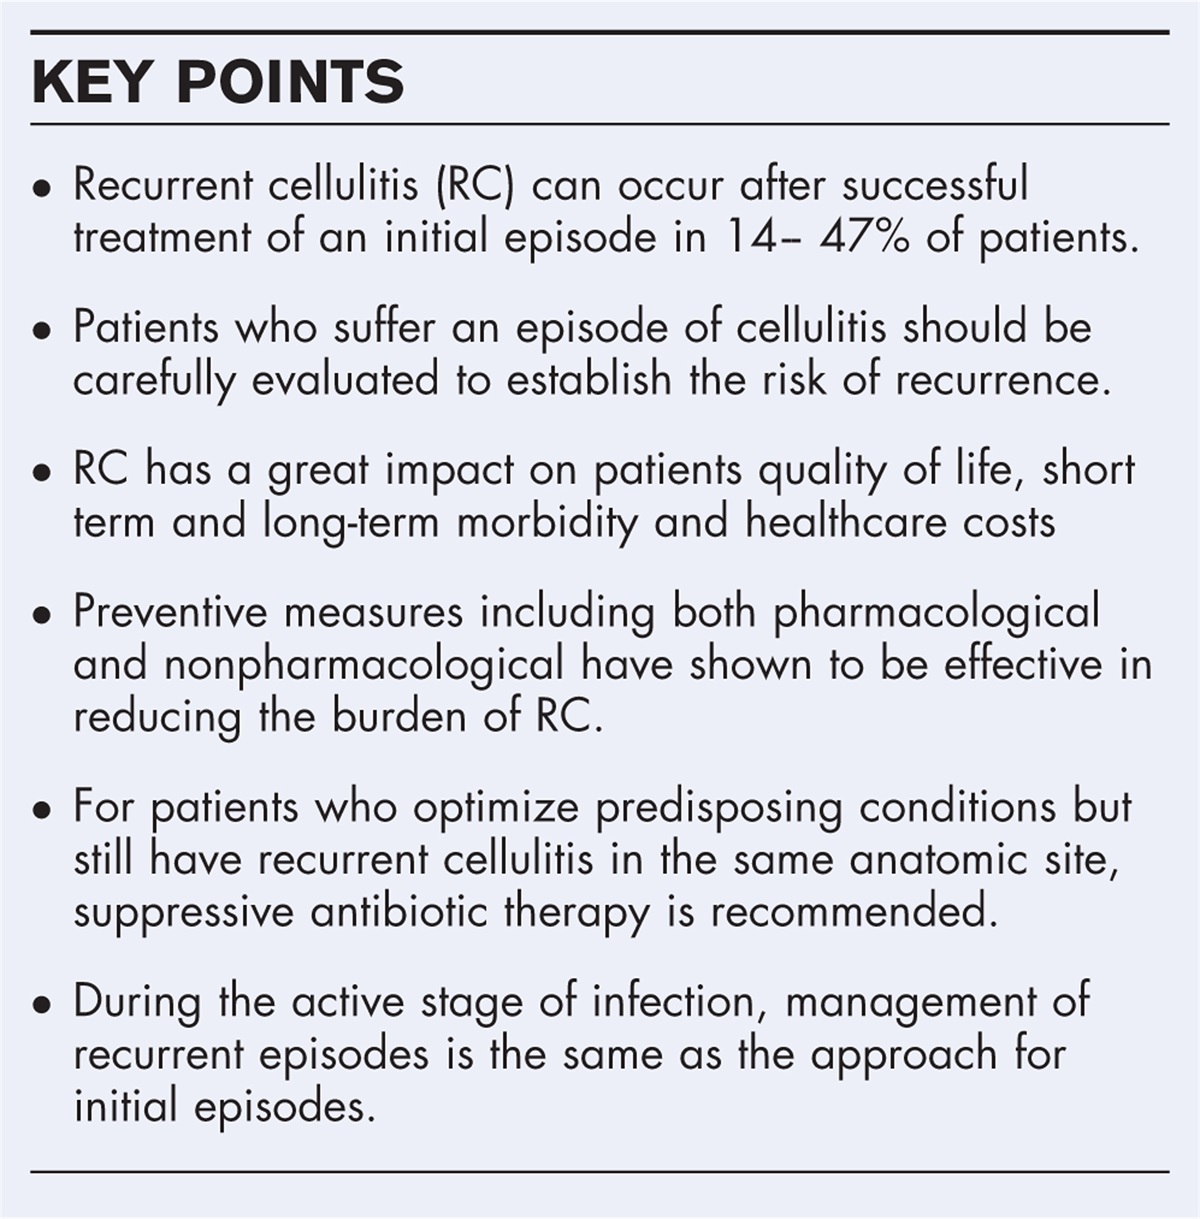 Prevention and treatment of recurrent cellulitis